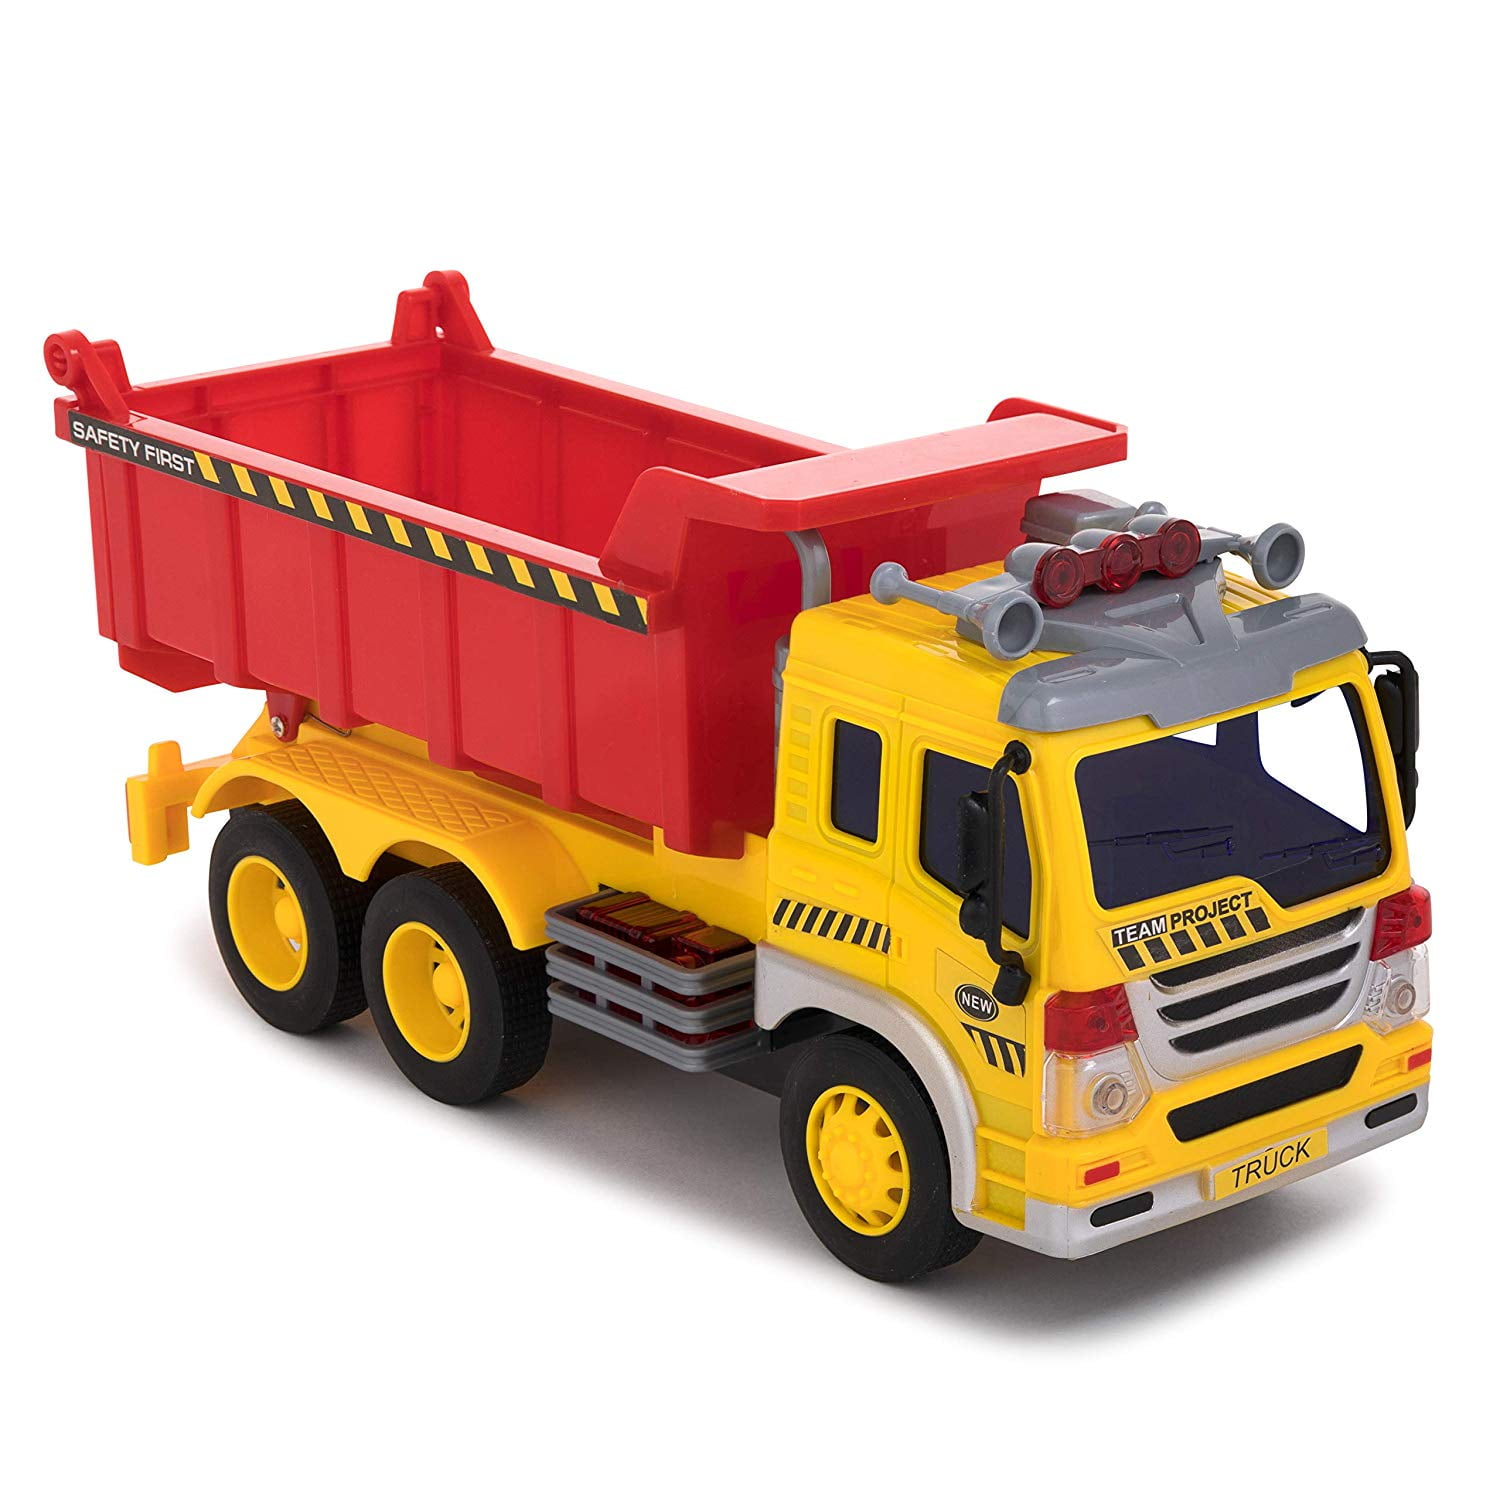 Kids Powered Garbage Truck Toy Dumper Lorry With Sounds & Lights Friction 